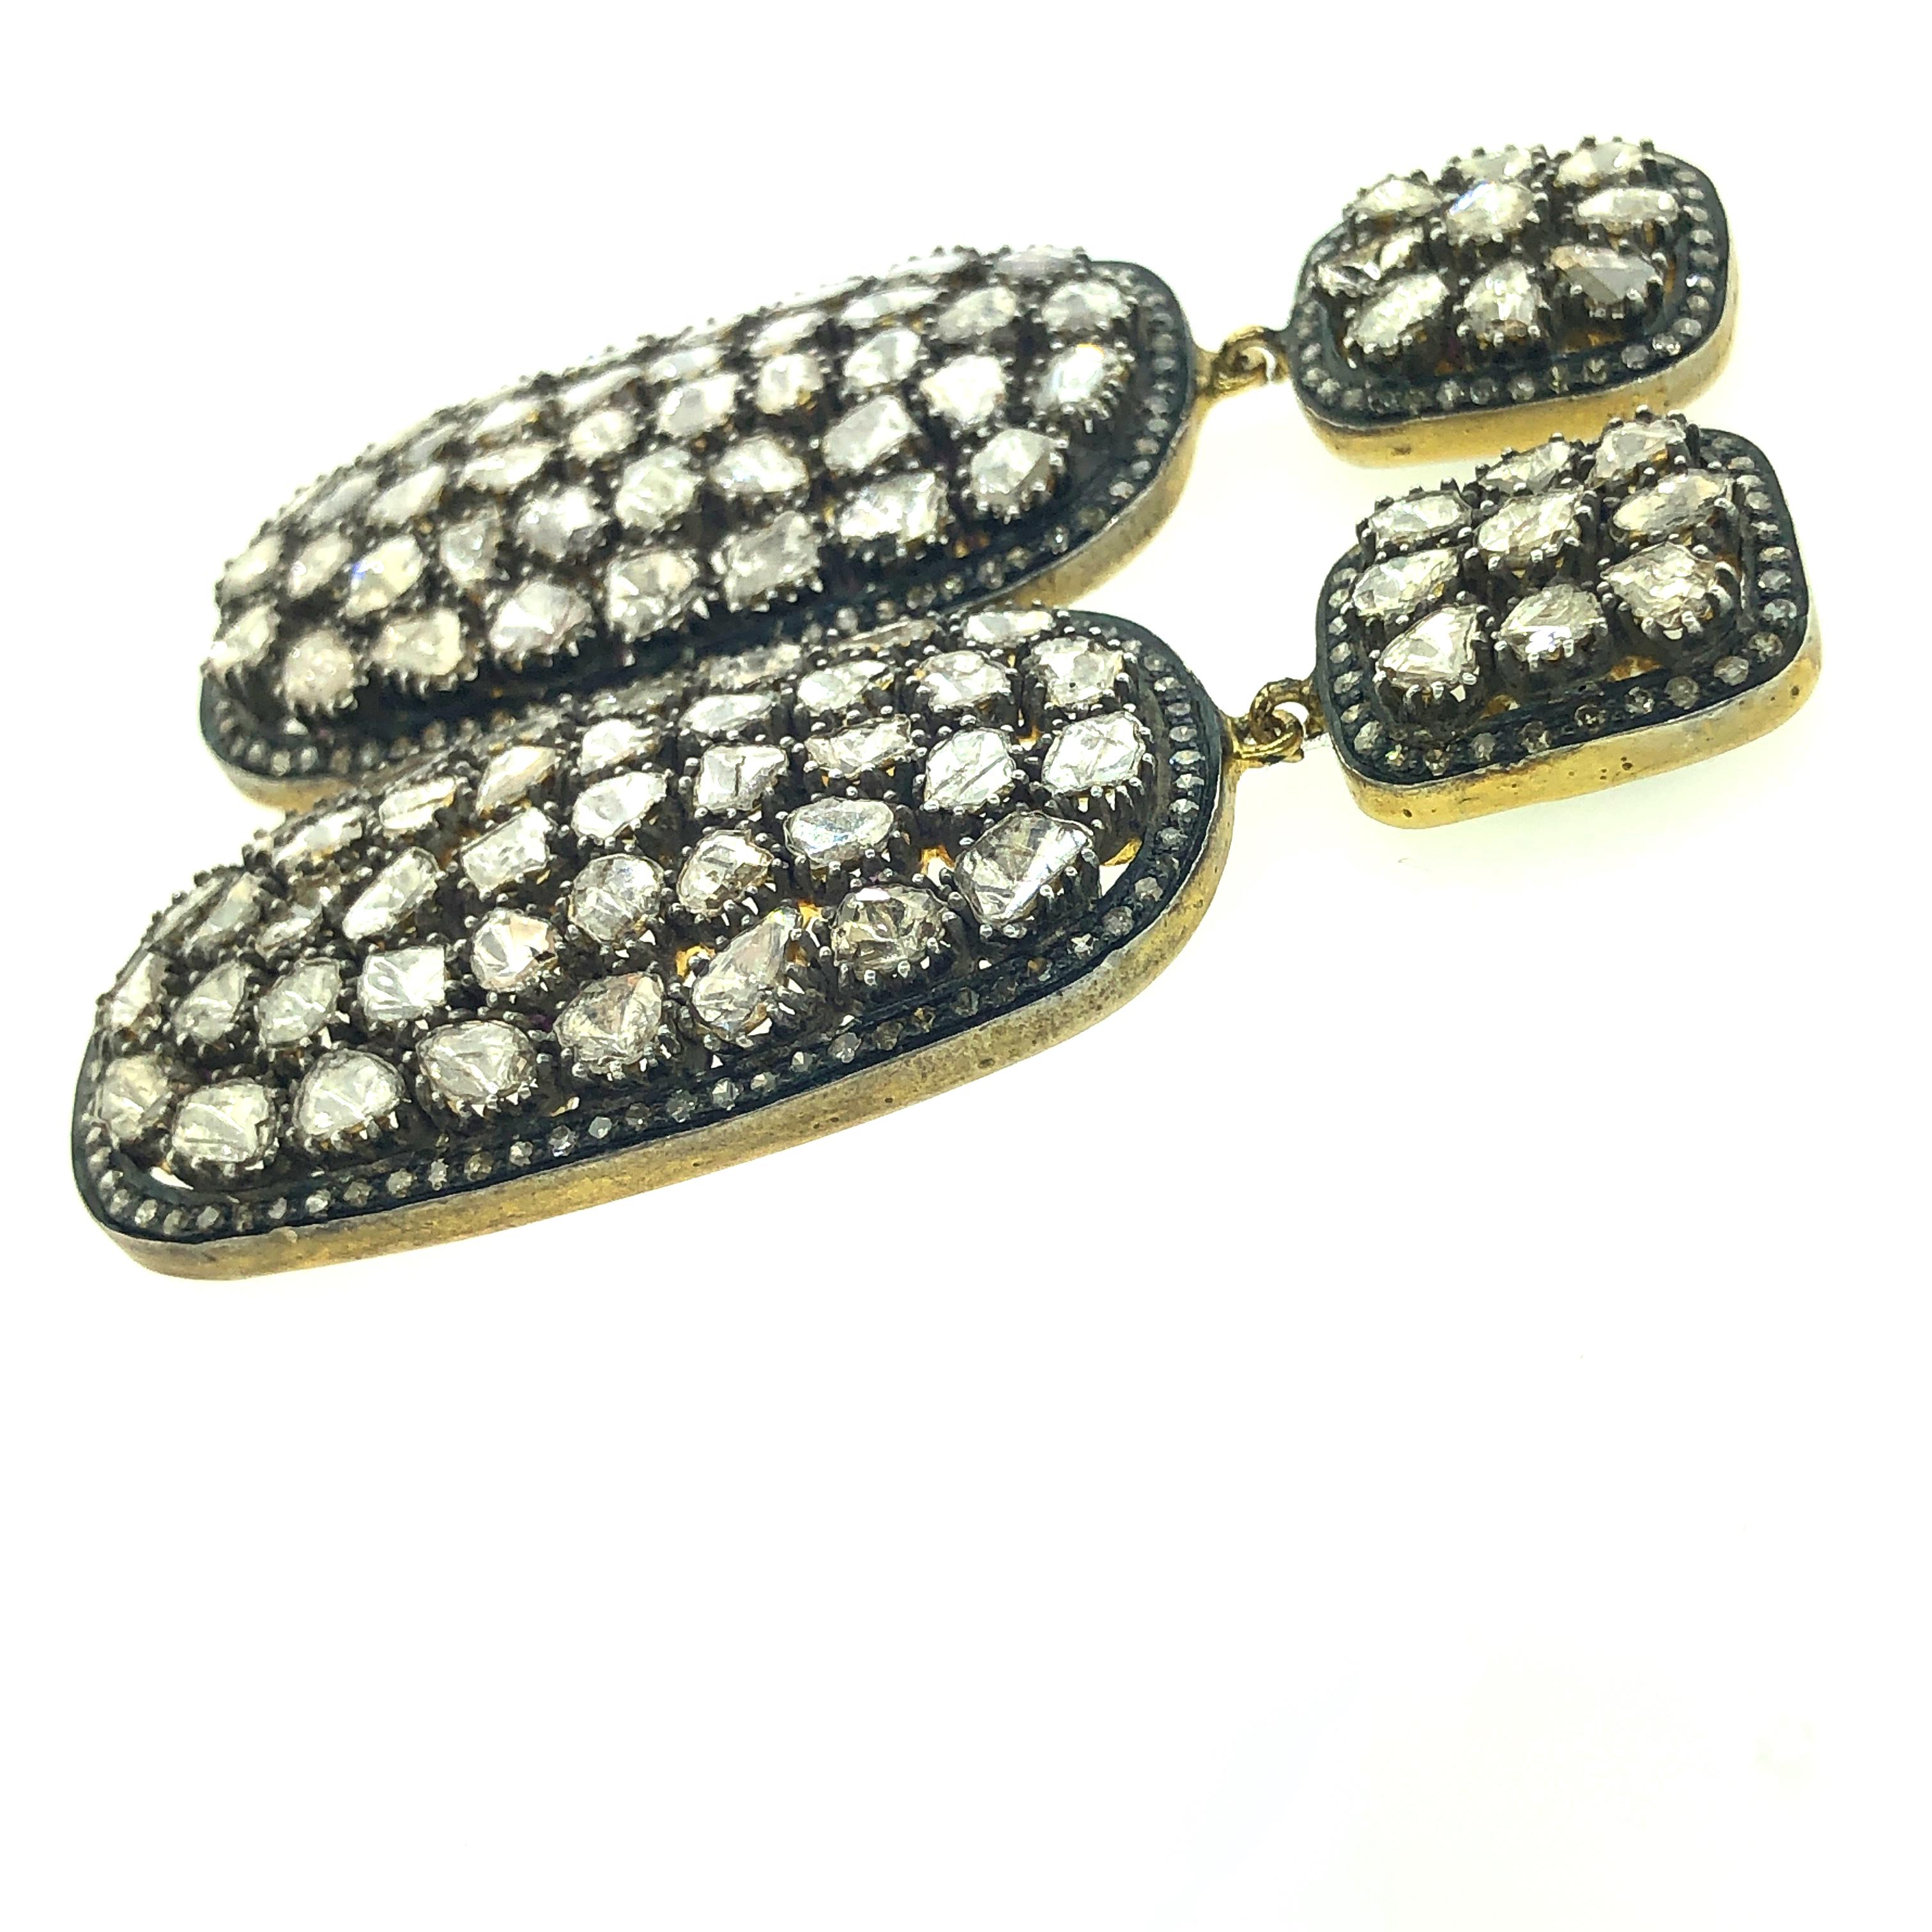 2.5 Inch Long 10 ct Old Mine Cut (Polki) Diamond Earring set in Oxidized Sterling Silver with pure 14K Gold post and back of earring. The old mine cut (polki) diamonds are surrounded by a line of pave diamonds. The top square of earring is joined by